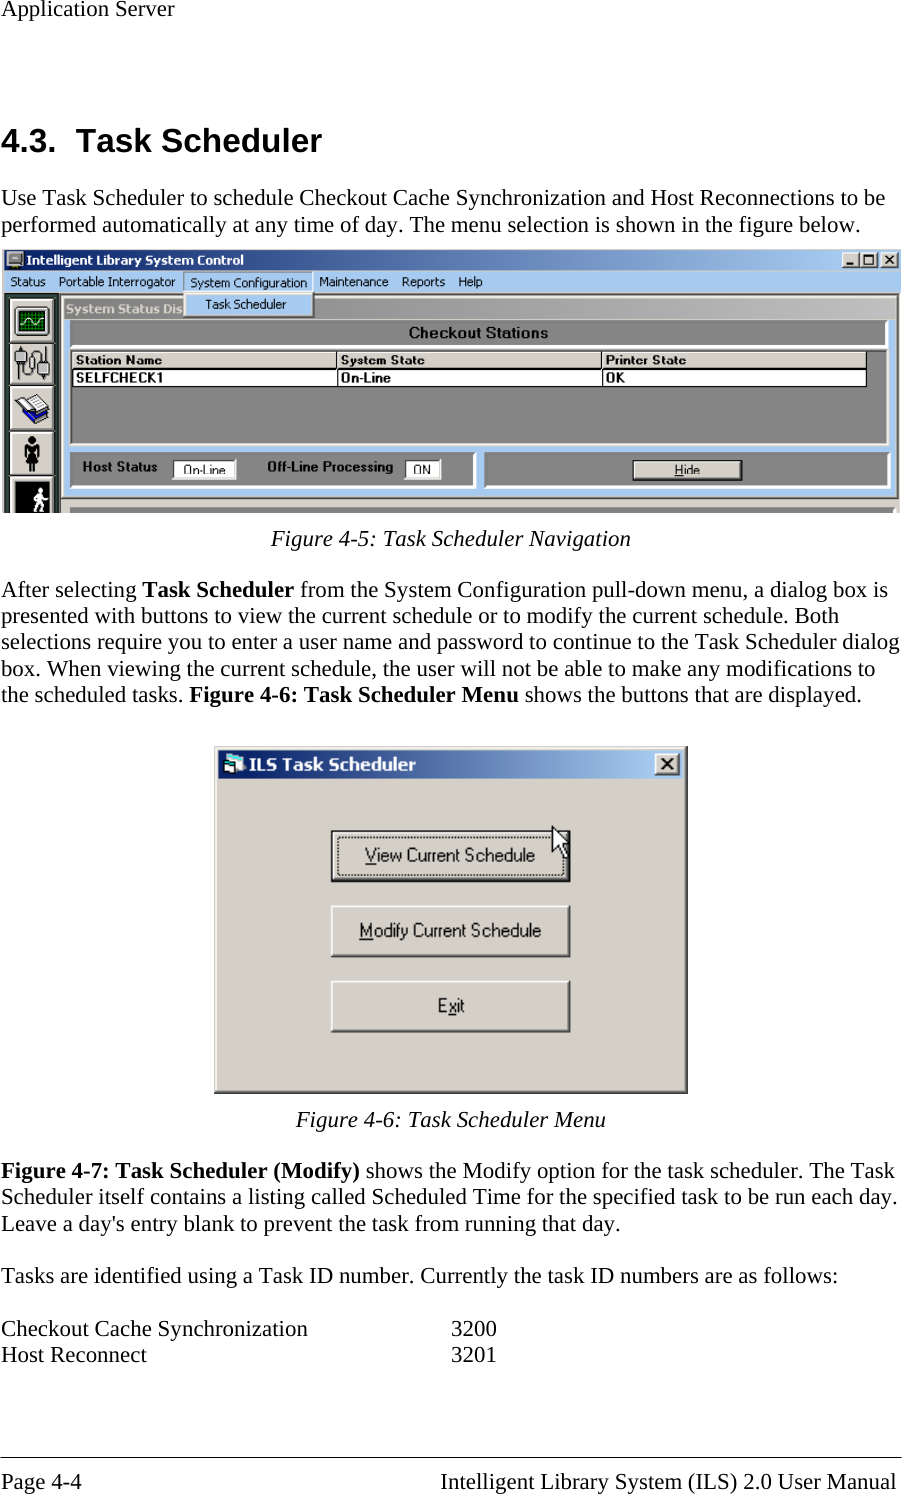 Application Server  4.3. Task Use Task Scheduler to schedule Checkout Cache Synchronization and Host Reconnections to be perform me of day. The menu selection is shown in the figure below. Scheduler ed automatically at any ti  Figure 4-5: Task Scheduler Navigation After sel figuration pull-down menu, a dialog box is presenteselection e g box. When vi o the sche e  displayed.  ecting Task Scheduler from the System Cond with buttons to view the current schedule or to modify the current schedule. Both s r quire you to enter a user name and password to continue to the Task Scheduler dialoewing the current schedule, the user will not be able to make any modifications tdul d tasks. Figure 4-6: Task Scheduler Menu shows the buttons that are Figure 4-6: Task Scheduler Menu Figure 4-7:  y option for the task scheduler. The Task Scheduler itself contains a listing called Scheduled Time for the specified task to be run each day. Leave a day  running that day.   asks are identified using a Task ID number. Currently the task ID numbers are as follows: Checkout Cache SyHost Re Task Scheduler (Modify) shows the Modif&apos;s entry blank to prevent the task fromT nchronization    3200 connect     3201  Page 4-4                                                       Intelligent Library System (ILS) 2.0 User Manual 